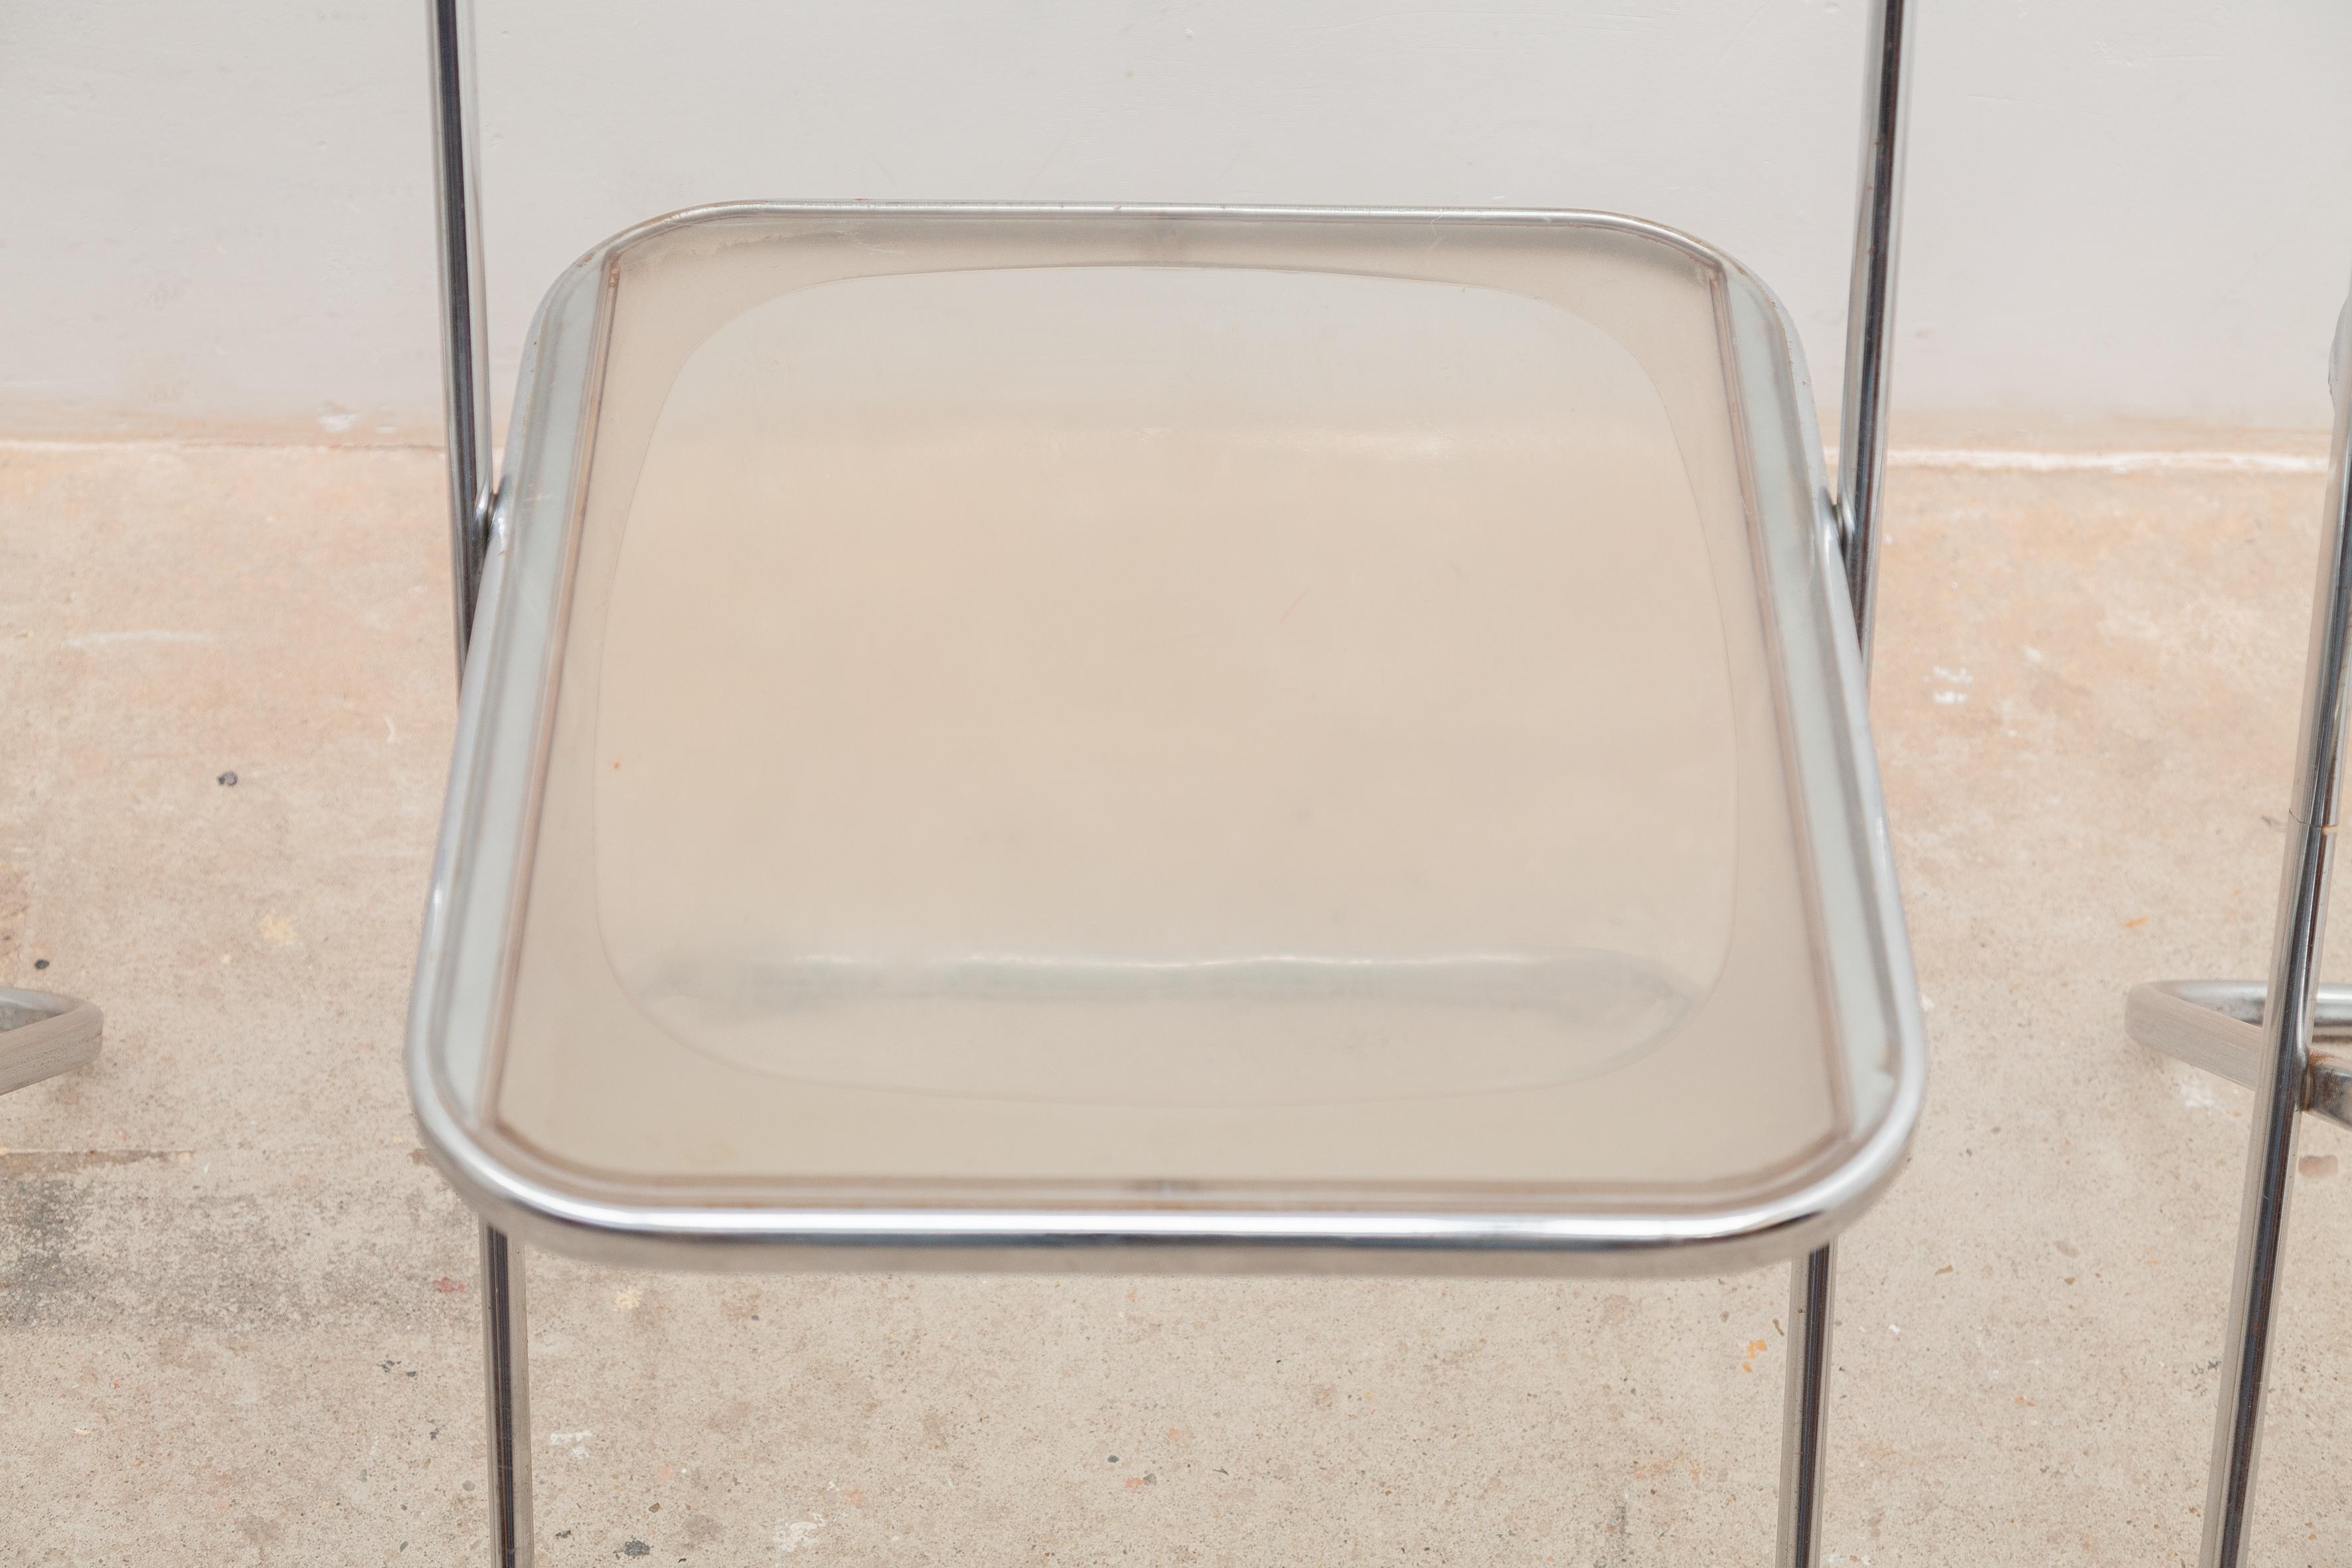 Late 20th Century Set of Four Lucite in th style of Giancarlo Piretti's Plia chairs, circa 1970's